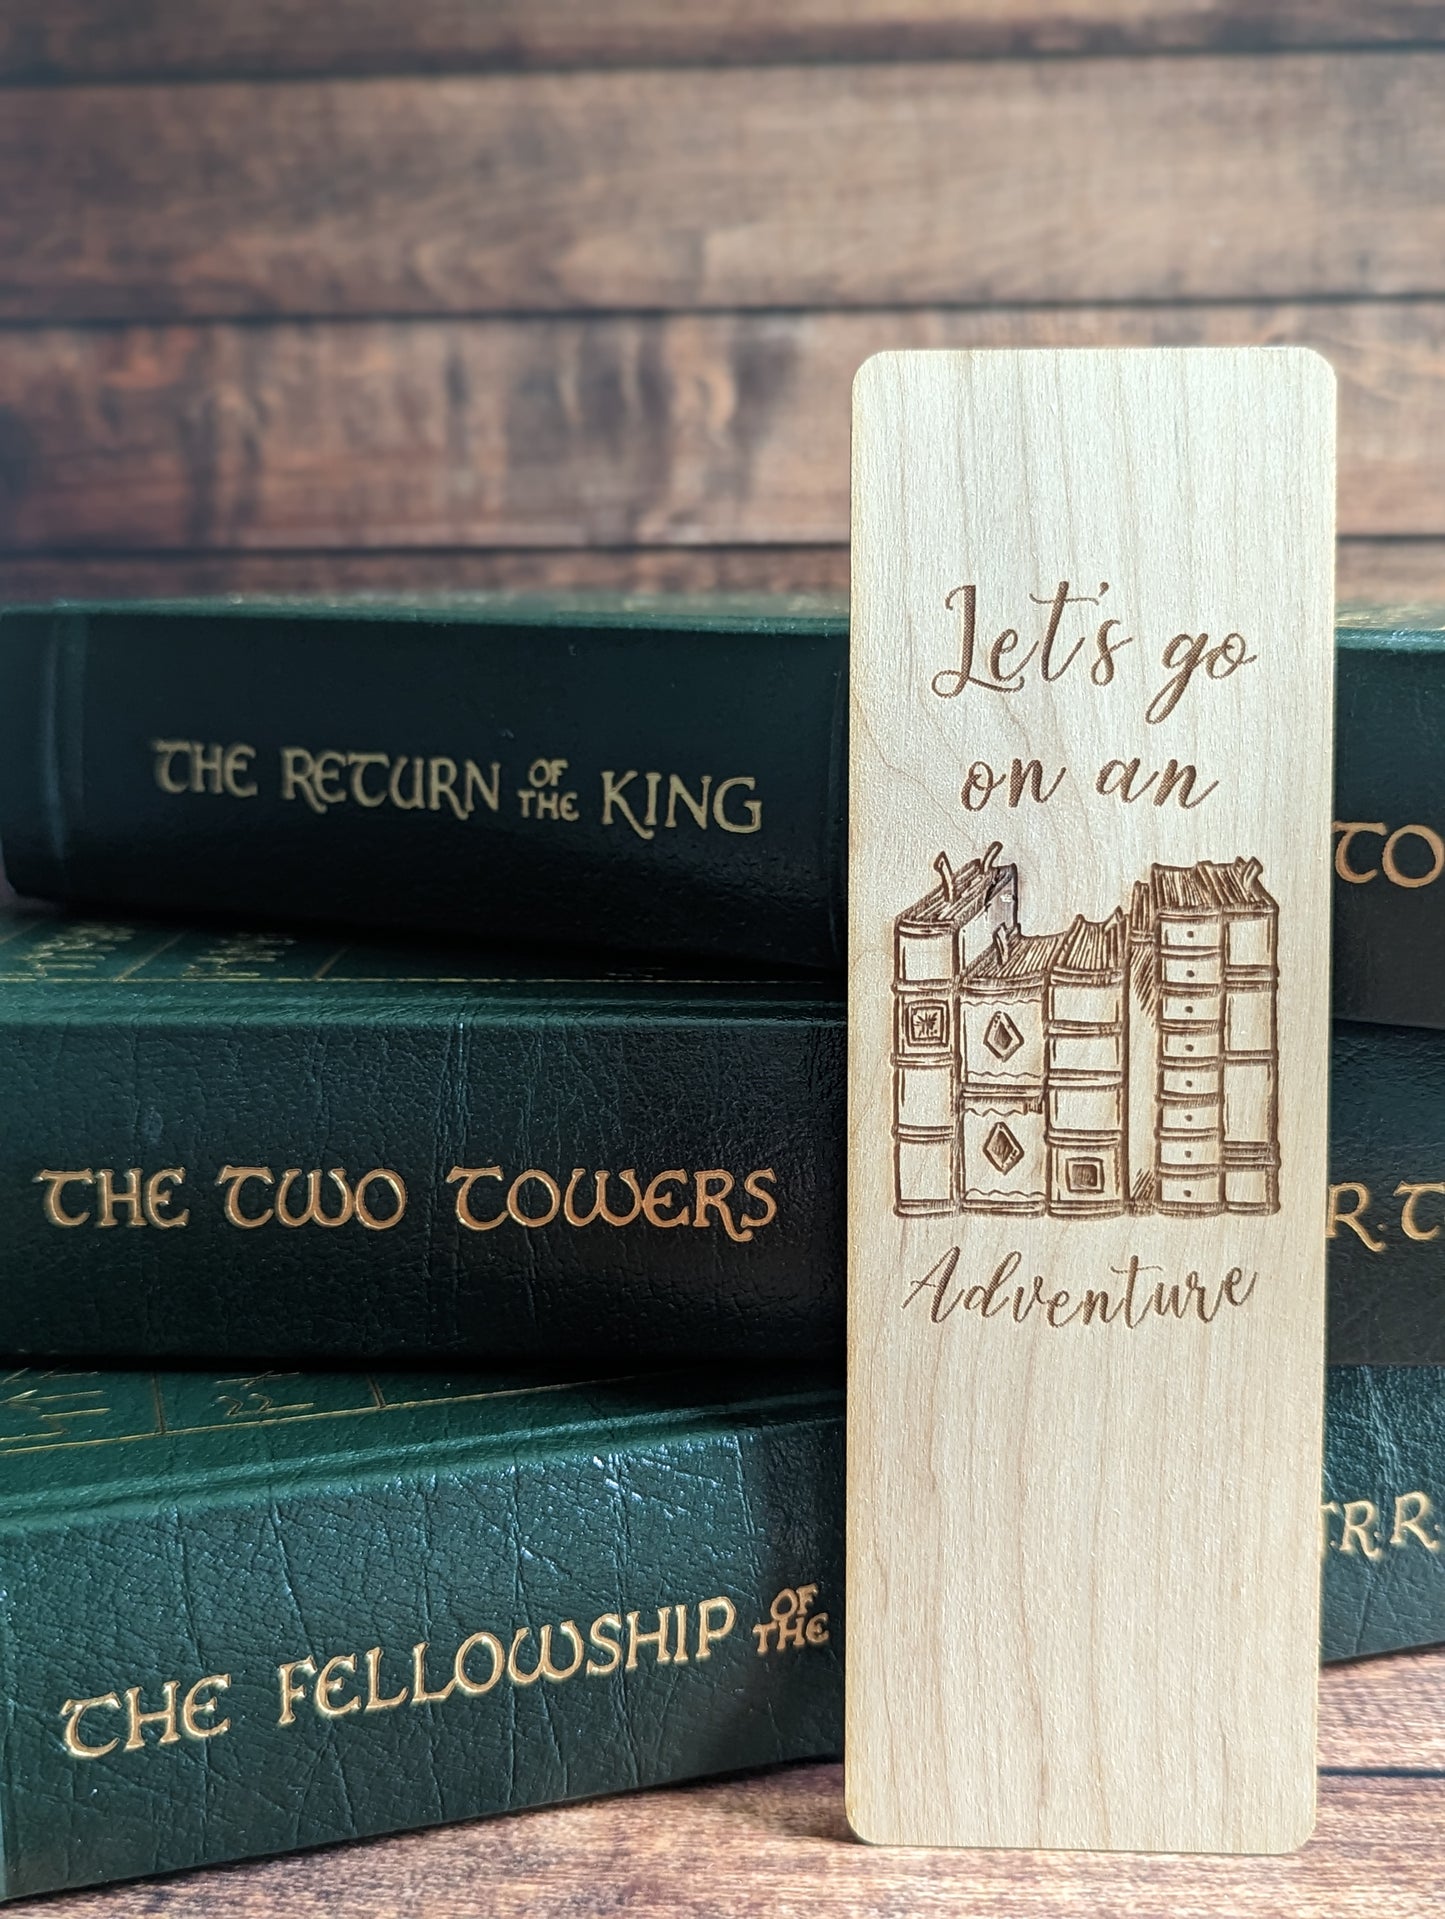 A wooden bookmark that says "let's go on an adventure."